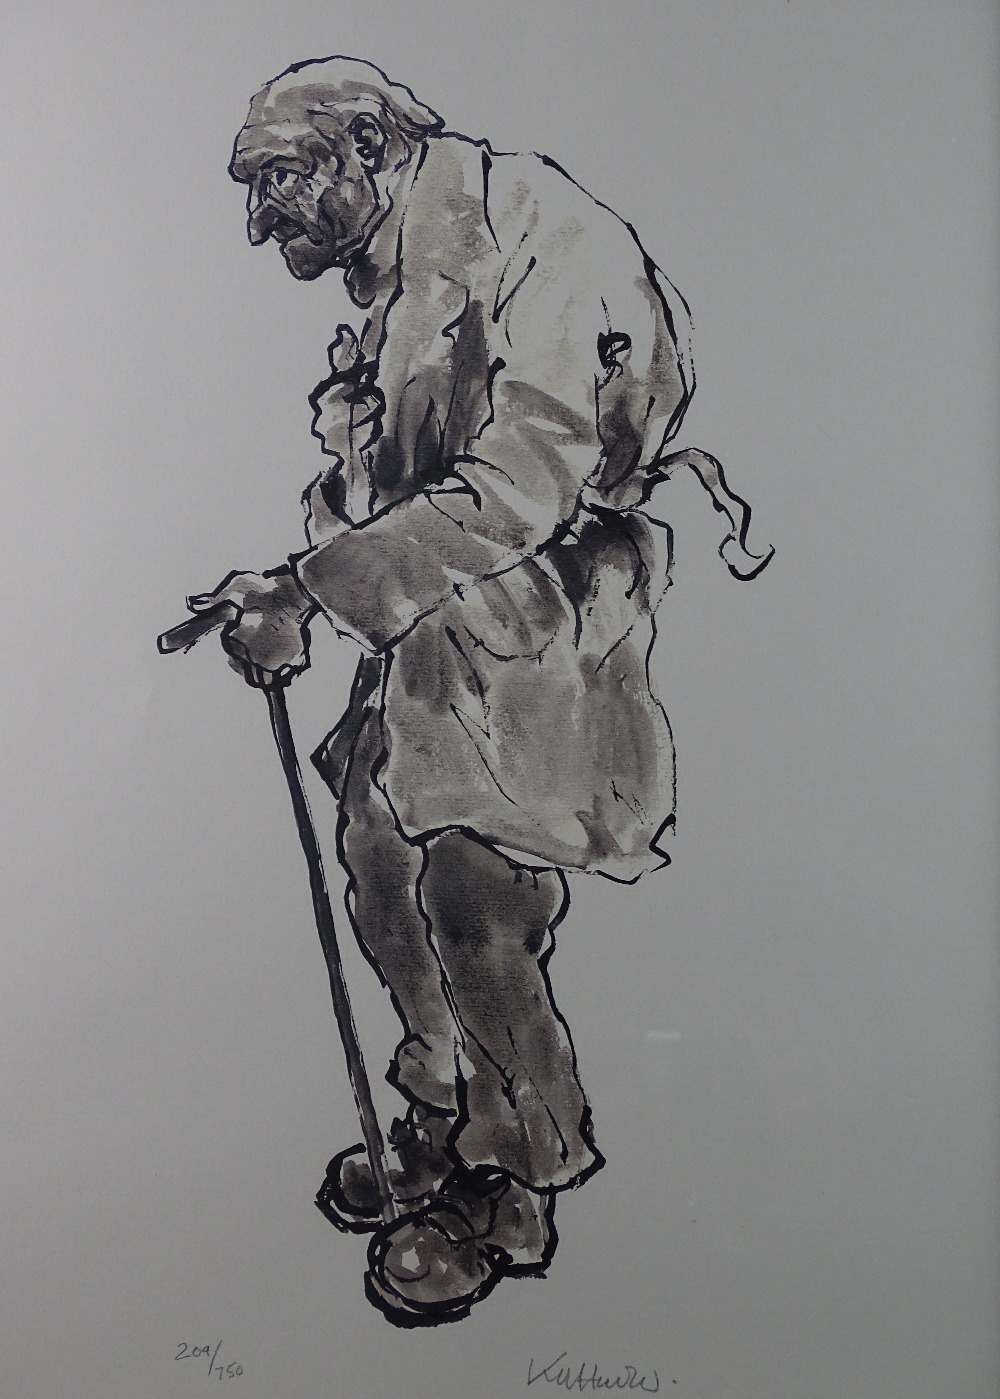 SIR KYFFIN WILLIAMS RA limited edition (209/750) colourwash print - old farmer with stick at a